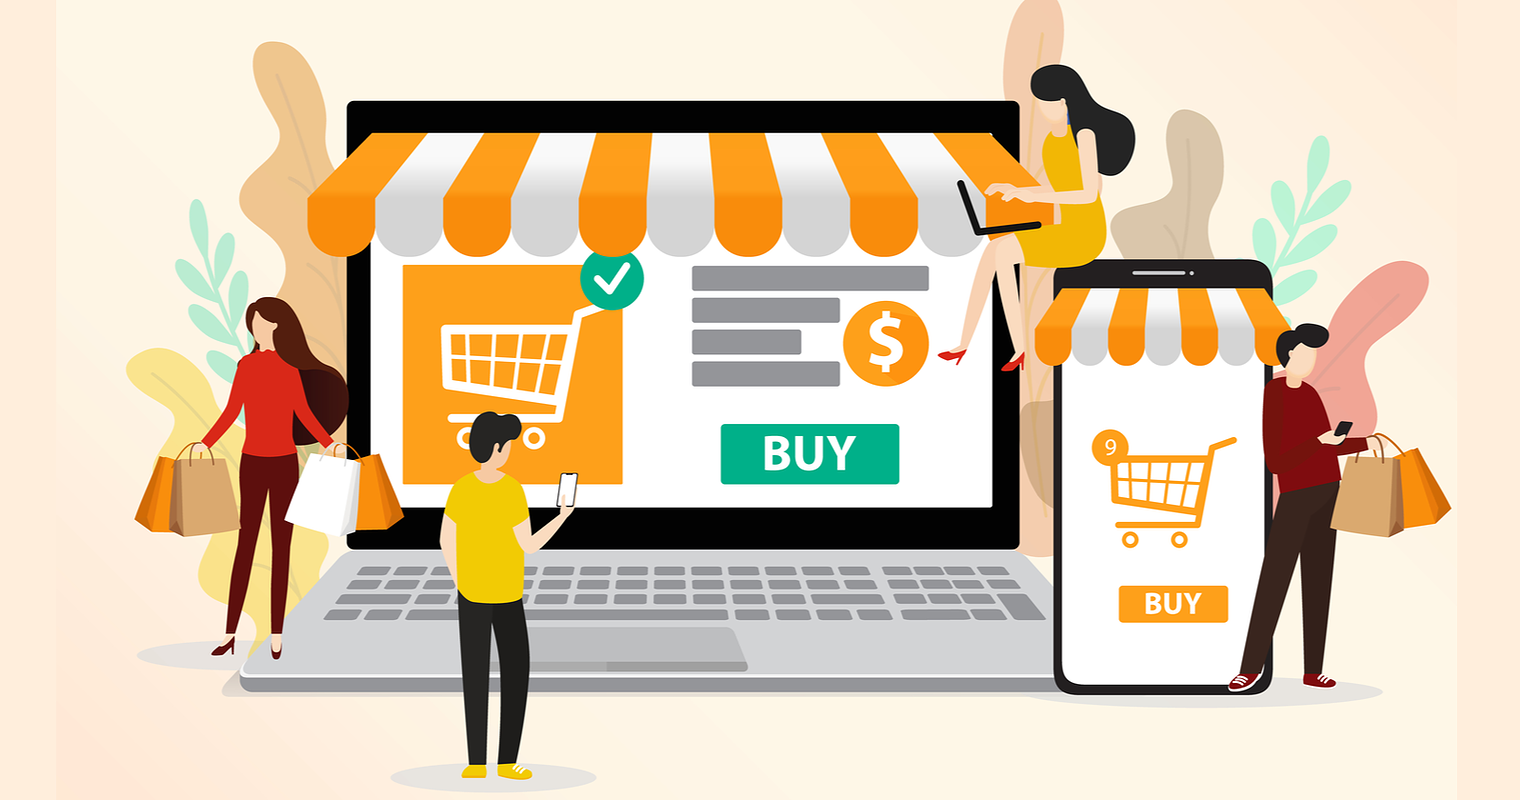 Ecommerce & Mcommerce Trends & Tips for Holiday Marketing